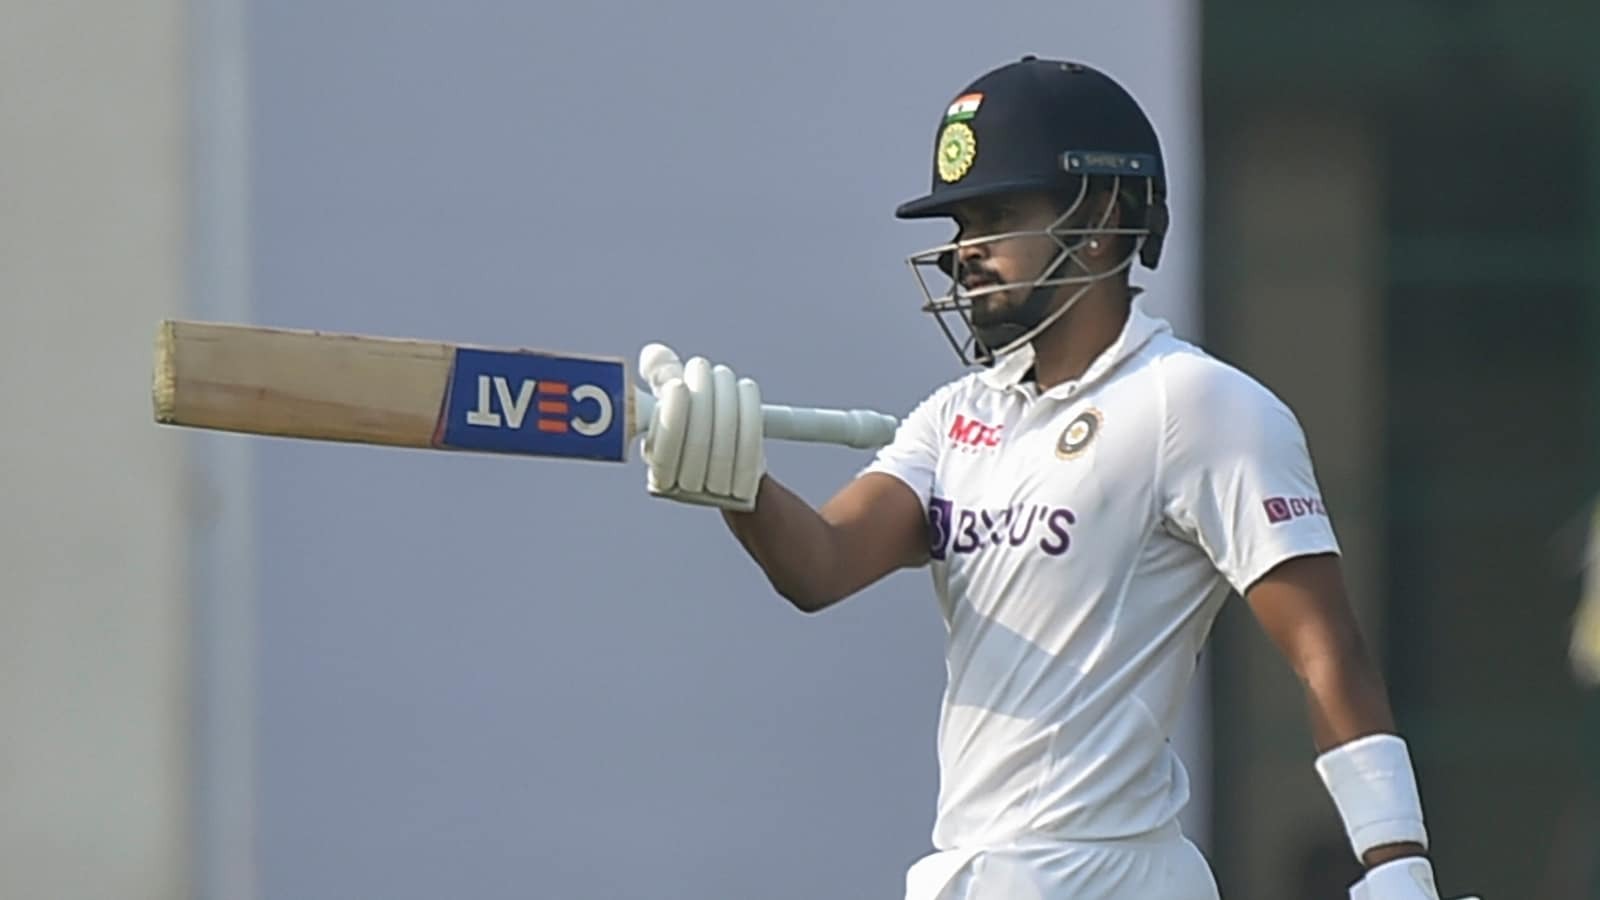 Shreyas Iyer became the 16th Indian player to score a century on his debut in Test Cricket